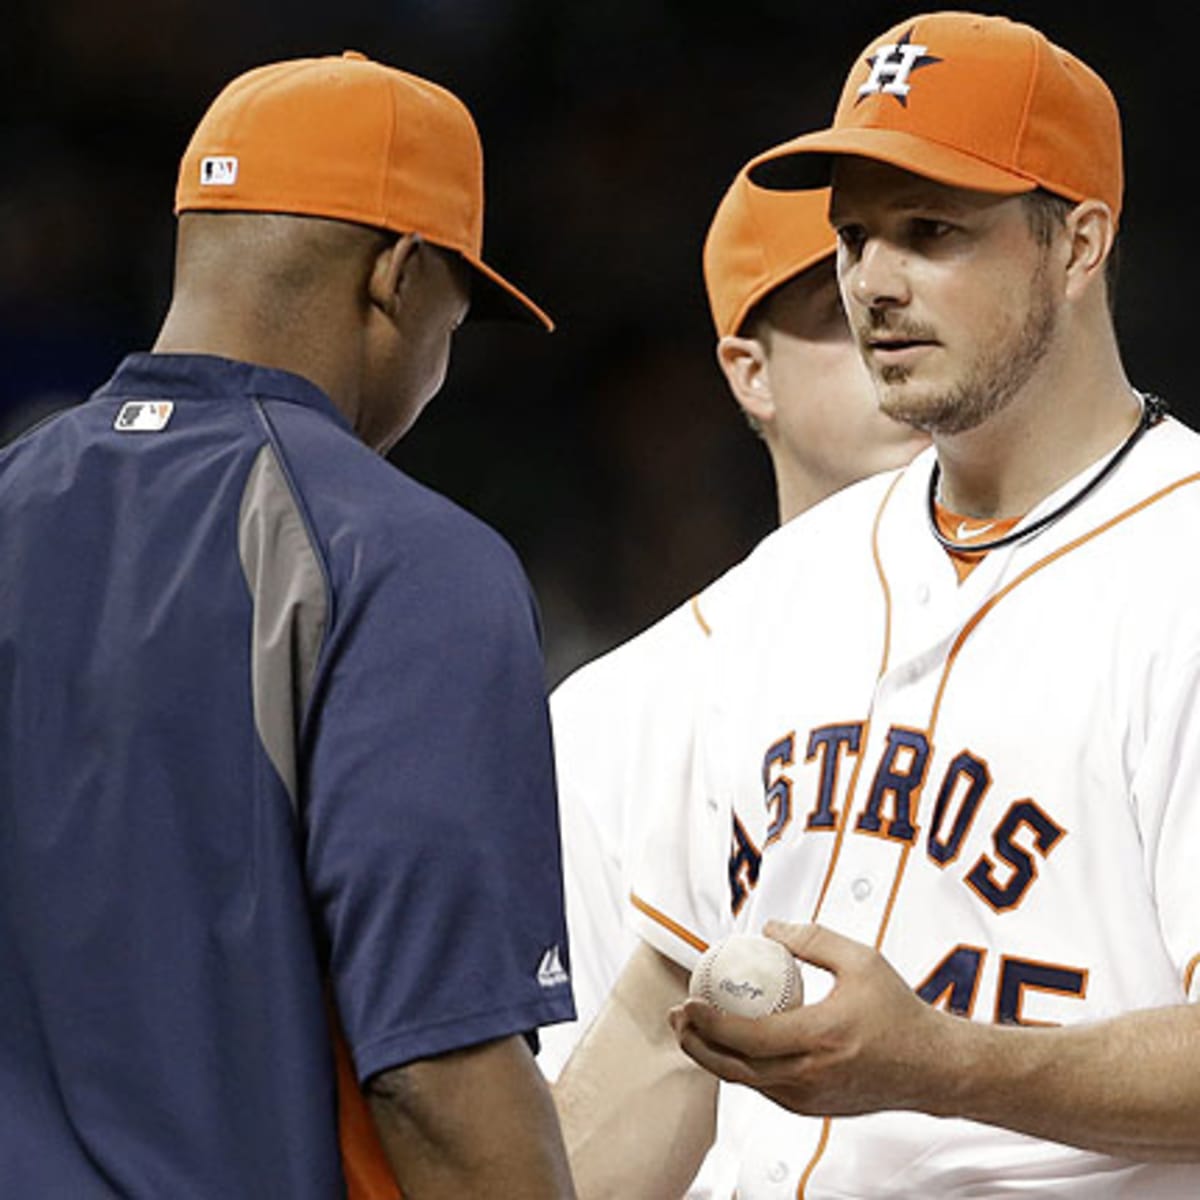 Astros OF Brandon Barnes hits for cycle against Mariners - Sports